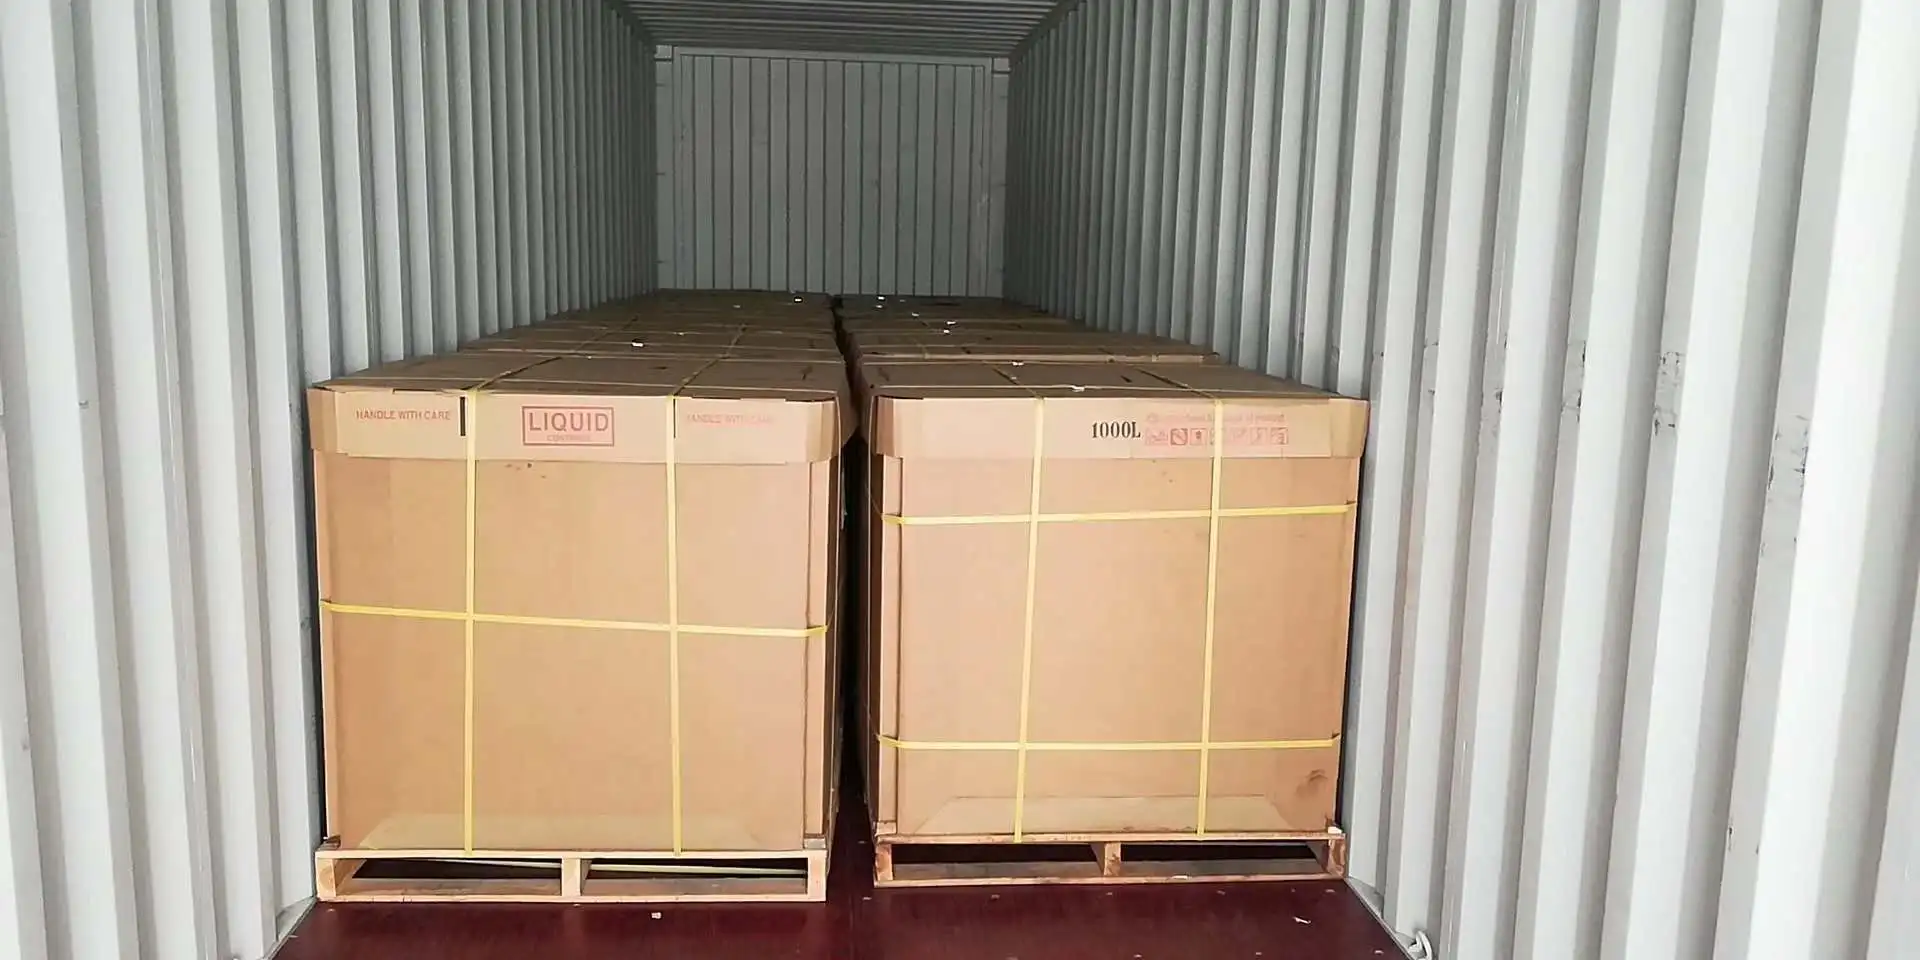 PAPER IBC in container.jpg